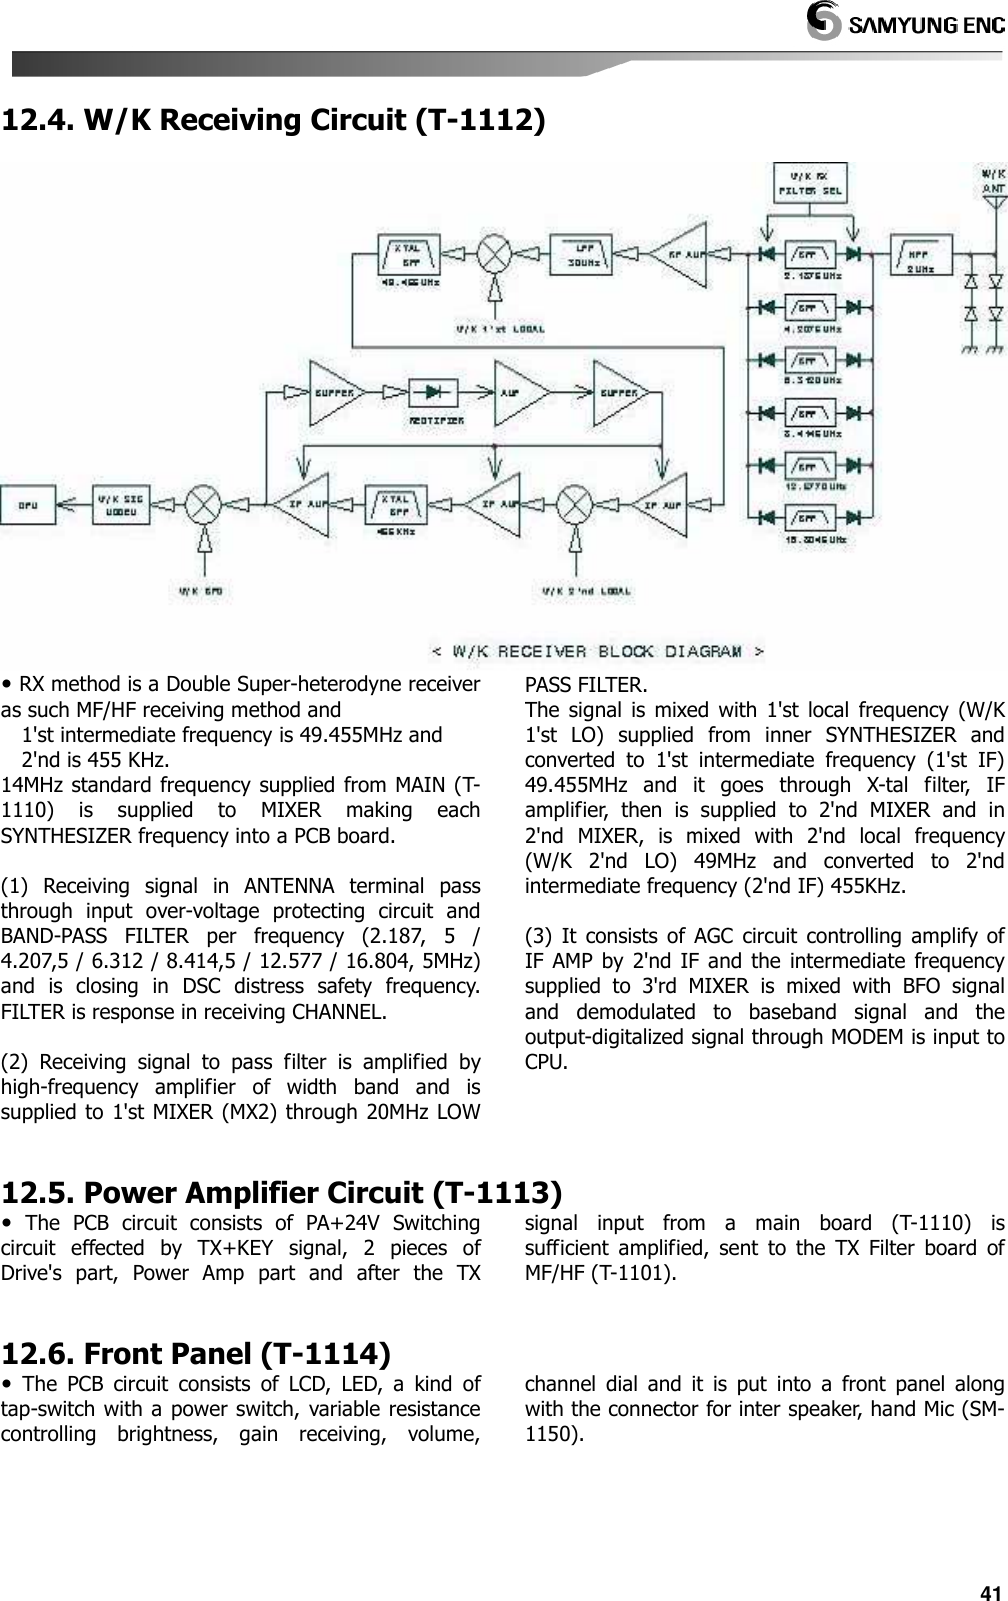   41 12.4. W/K Receiving Circuit (T-1112)    RX method is a Double Super-heterodyne receiver as such MF/HF receiving method and   1&apos;st intermediate frequency is 49.455MHz and   2&apos;nd is 455 KHz. 14MHz standard frequency supplied from MAIN (T-1110)  is  supplied  to  MIXER  making  each SYNTHESIZER frequency into a PCB board.  (1)  Receiving  signal  in  ANTENNA  terminal  pass through  input  over-voltage  protecting  circuit  and BAND-PASS  FILTER  per  frequency  (2.187,  5  / 4.207,5 / 6.312 / 8.414,5 / 12.577 / 16.804, 5MHz) and  is  closing  in  DSC  distress  safety  frequency. FILTER is response in receiving CHANNEL.  (2)  Receiving  signal  to  pass  filter  is  amplified  by high-frequency  amplifier  of  width  band  and  is supplied to 1&apos;st MIXER (MX2) through 20MHz LOW PASS FILTER. The  signal  is  mixed  with  1&apos;st  local  frequency  (W/K 1&apos;st  LO)  supplied  from  inner  SYNTHESIZER  and converted  to  1&apos;st  intermediate  frequency  (1&apos;st  IF) 49.455MHz  and  it  goes  through  X-tal  filter,  IF amplifier,  then  is  supplied  to  2&apos;nd  MIXER  and  in 2&apos;nd  MIXER,  is  mixed  with  2&apos;nd  local  frequency (W/K  2&apos;nd  LO)  49MHz  and  converted  to  2&apos;nd intermediate frequency (2&apos;nd IF) 455KHz.  (3)  It  consists  of  AGC  circuit  controlling  amplify of IF AMP  by 2&apos;nd  IF  and  the  intermediate  frequency supplied  to  3&apos;rd  MIXER  is  mixed  with  BFO  signal and  demodulated  to  baseband  signal  and  the output-digitalized signal through MODEM is input to CPU.   12.5. Power Amplifier Circuit (T-1113)   The  PCB  circuit  consists  of  PA+24V  Switching circuit  effected  by  TX+KEY  signal,  2  pieces  of Drive&apos;s  part,  Power  Amp  part  and  after  the  TX signal  input  from  a  main  board  (T-1110)  is sufficient  amplified,  sent  to  the  TX  Filter  board  of   MF/HF (T-1101).   12.6. Front Panel (T-1114)   The  PCB  circuit  consists  of  LCD,  LED,  a  kind  of tap-switch with a power switch, variable resistance controlling  brightness,  gain  receiving,  volume, channel  dial  and  it  is  put  into  a  front  panel  along with the connector for inter speaker, hand Mic (SM-1150).  